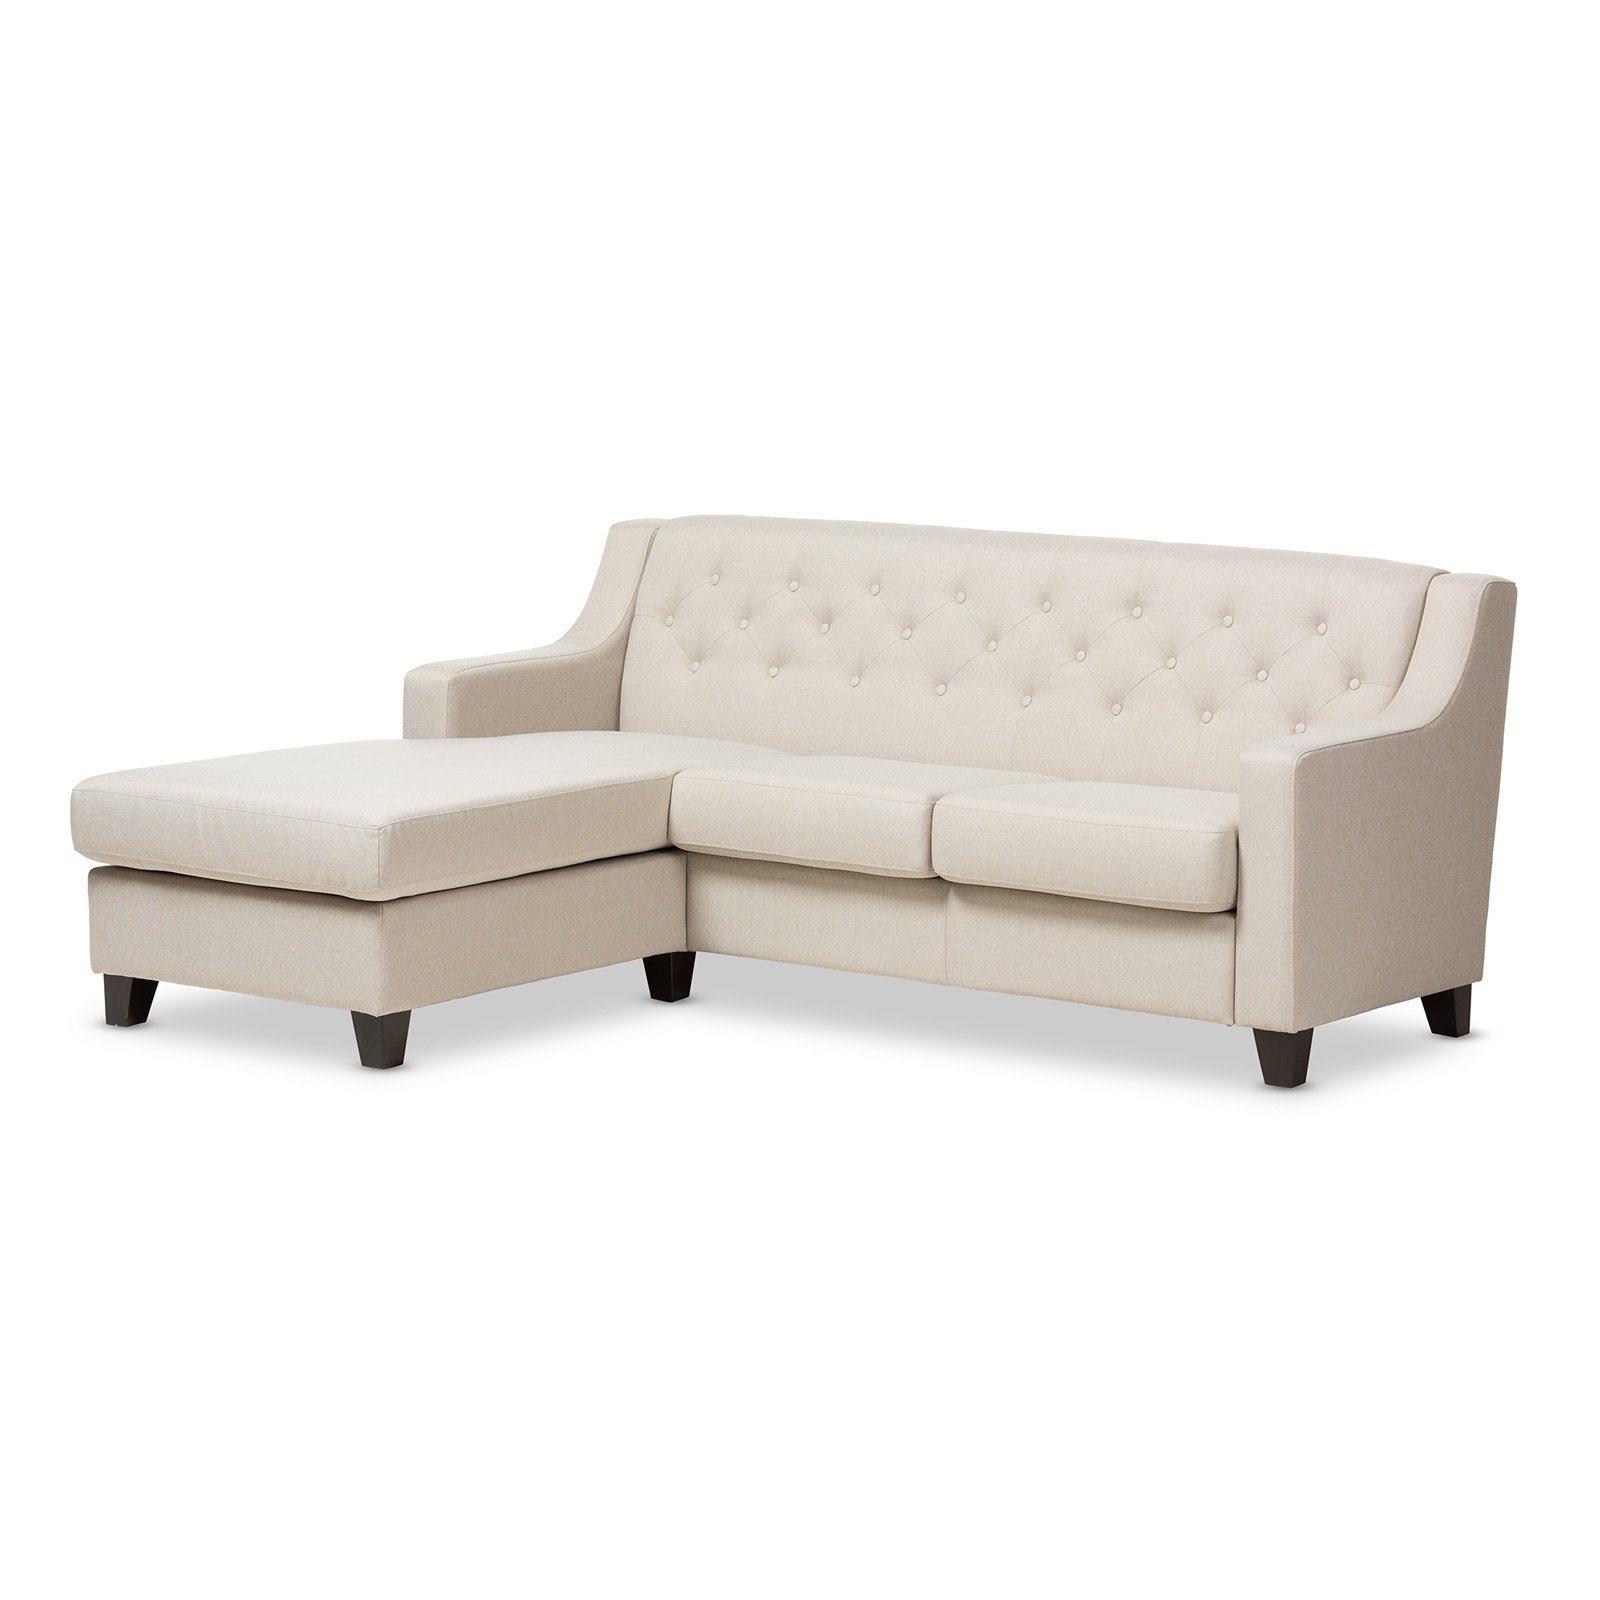 Baxton Studio Arcadia Light Beige Fabric Upholstered Button-Tufted 2-Piece Sectional Sofa